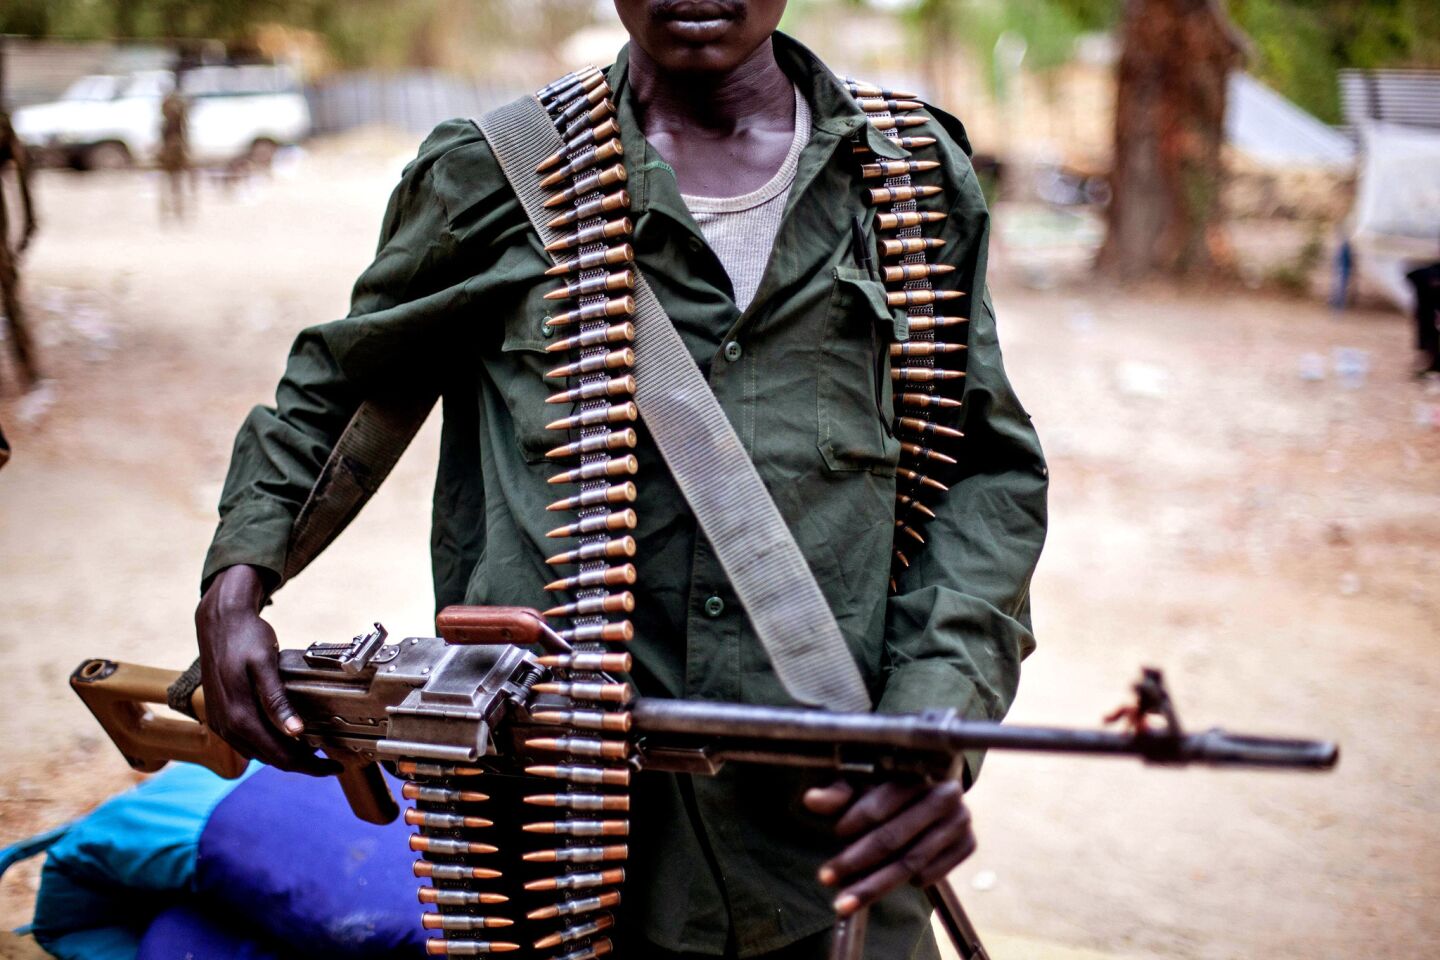 A member of South Sudanese antigovernment forces wields a machine gun in Malakal.